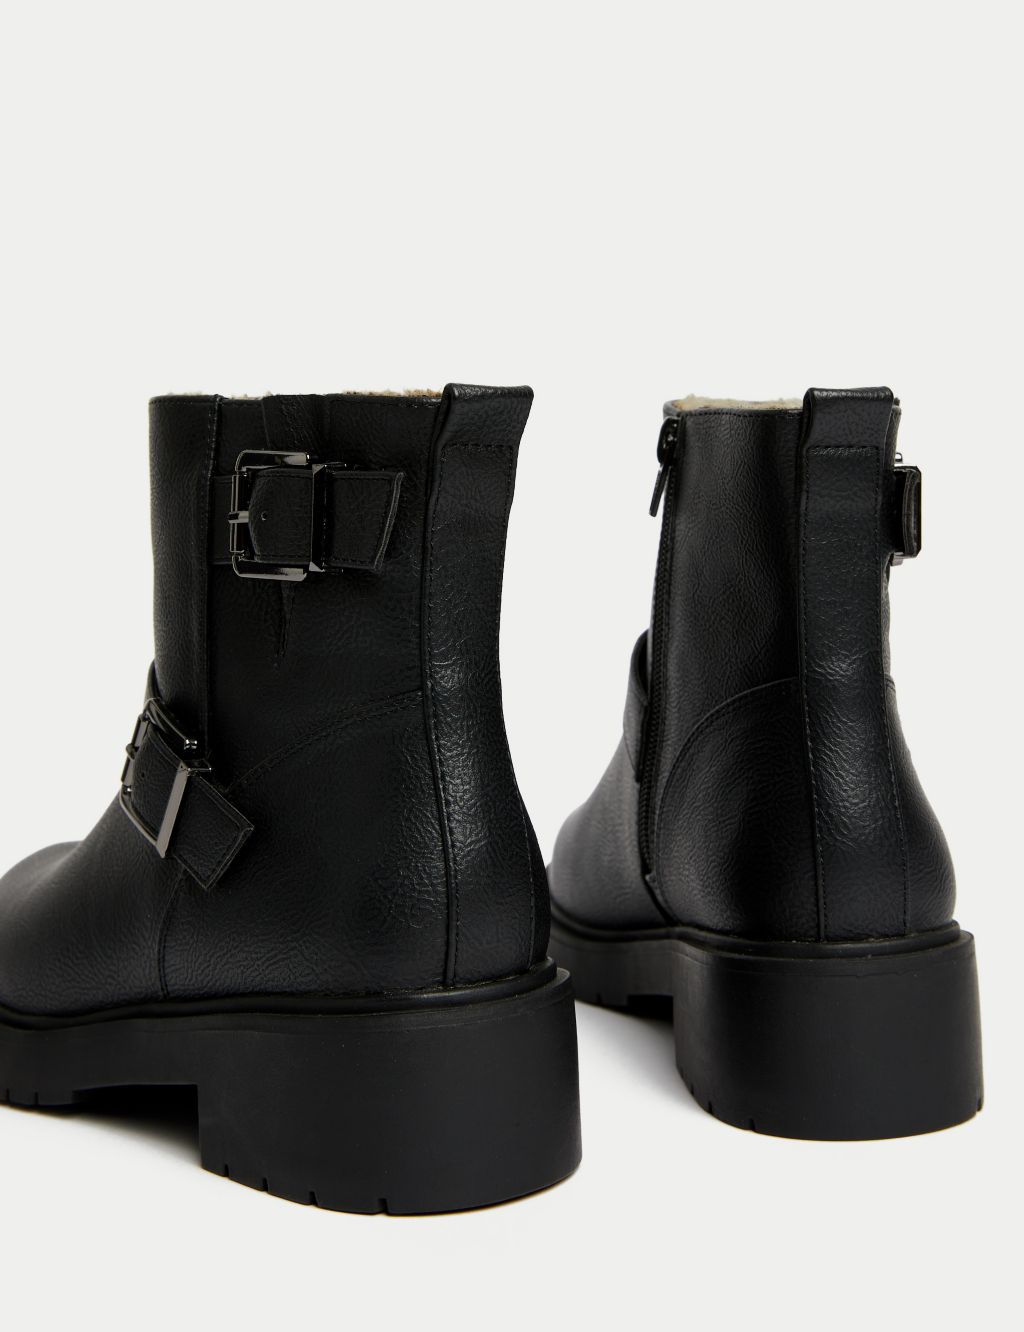 Biker Buckle Flat Round Toe Ankle Boots image 3